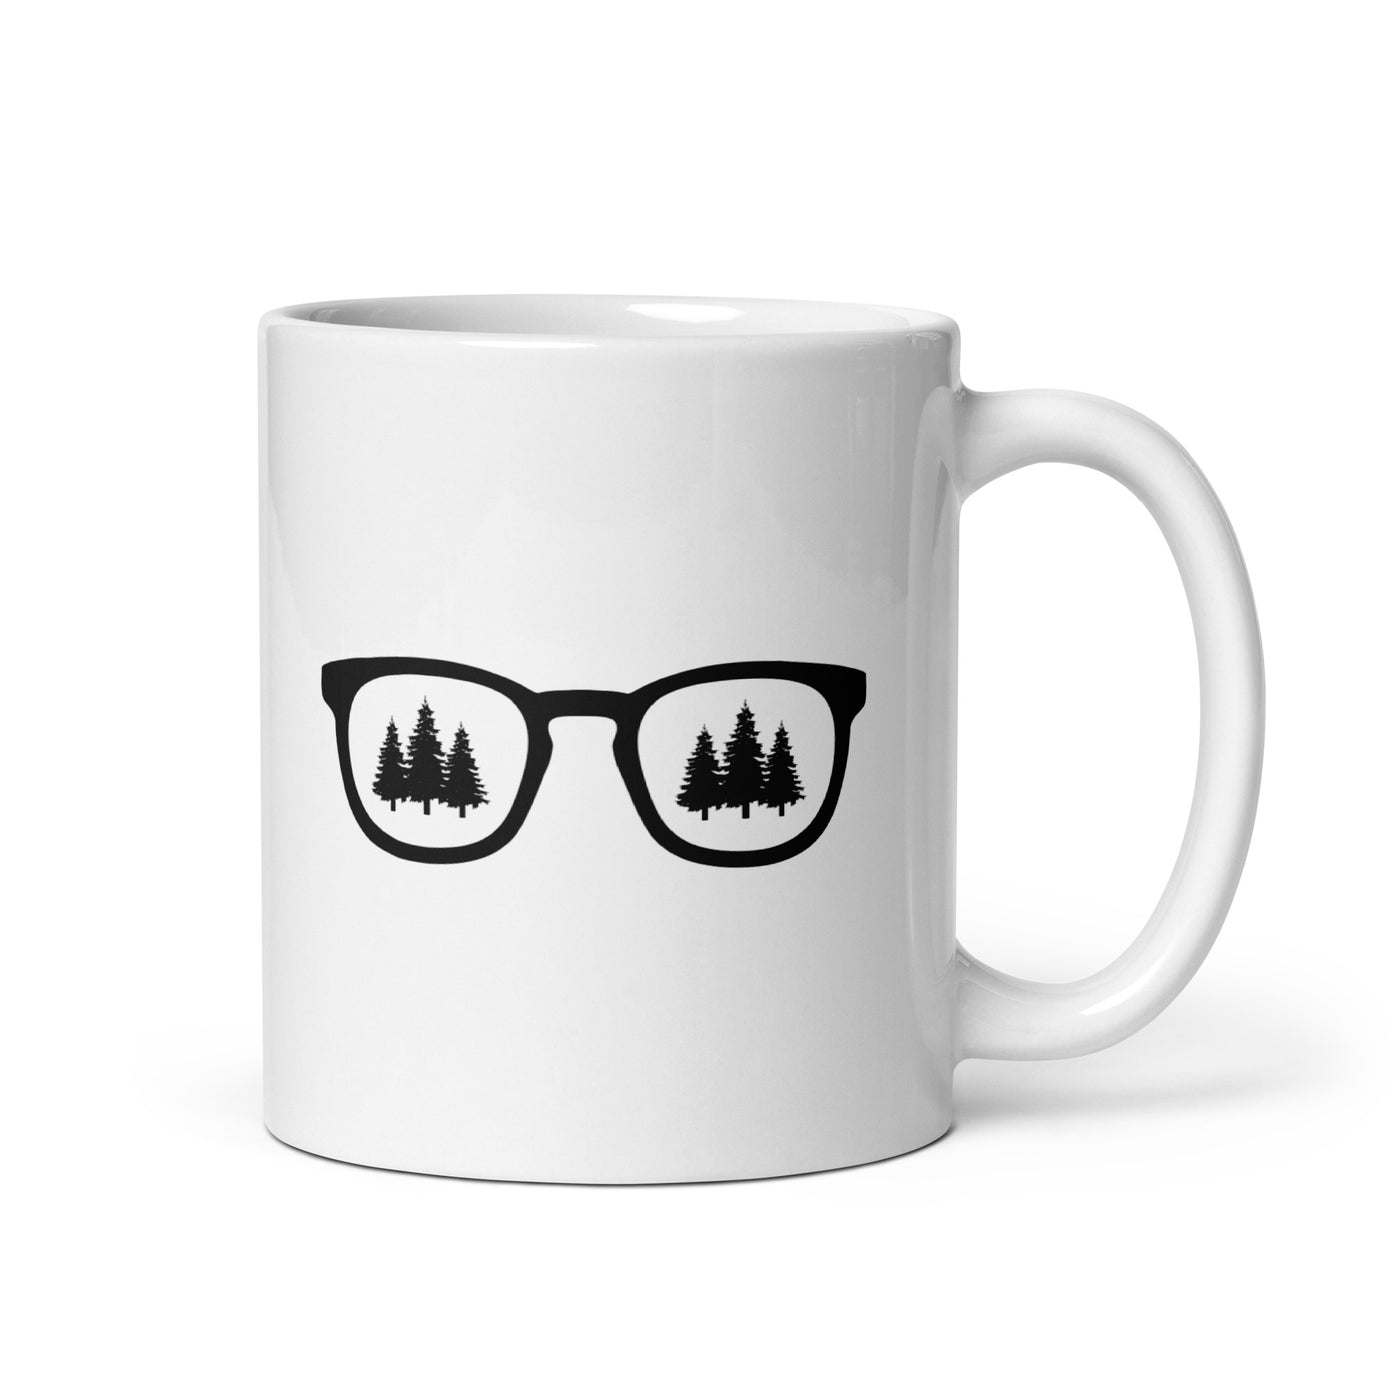 Sunglasses And Trees - Tasse camping